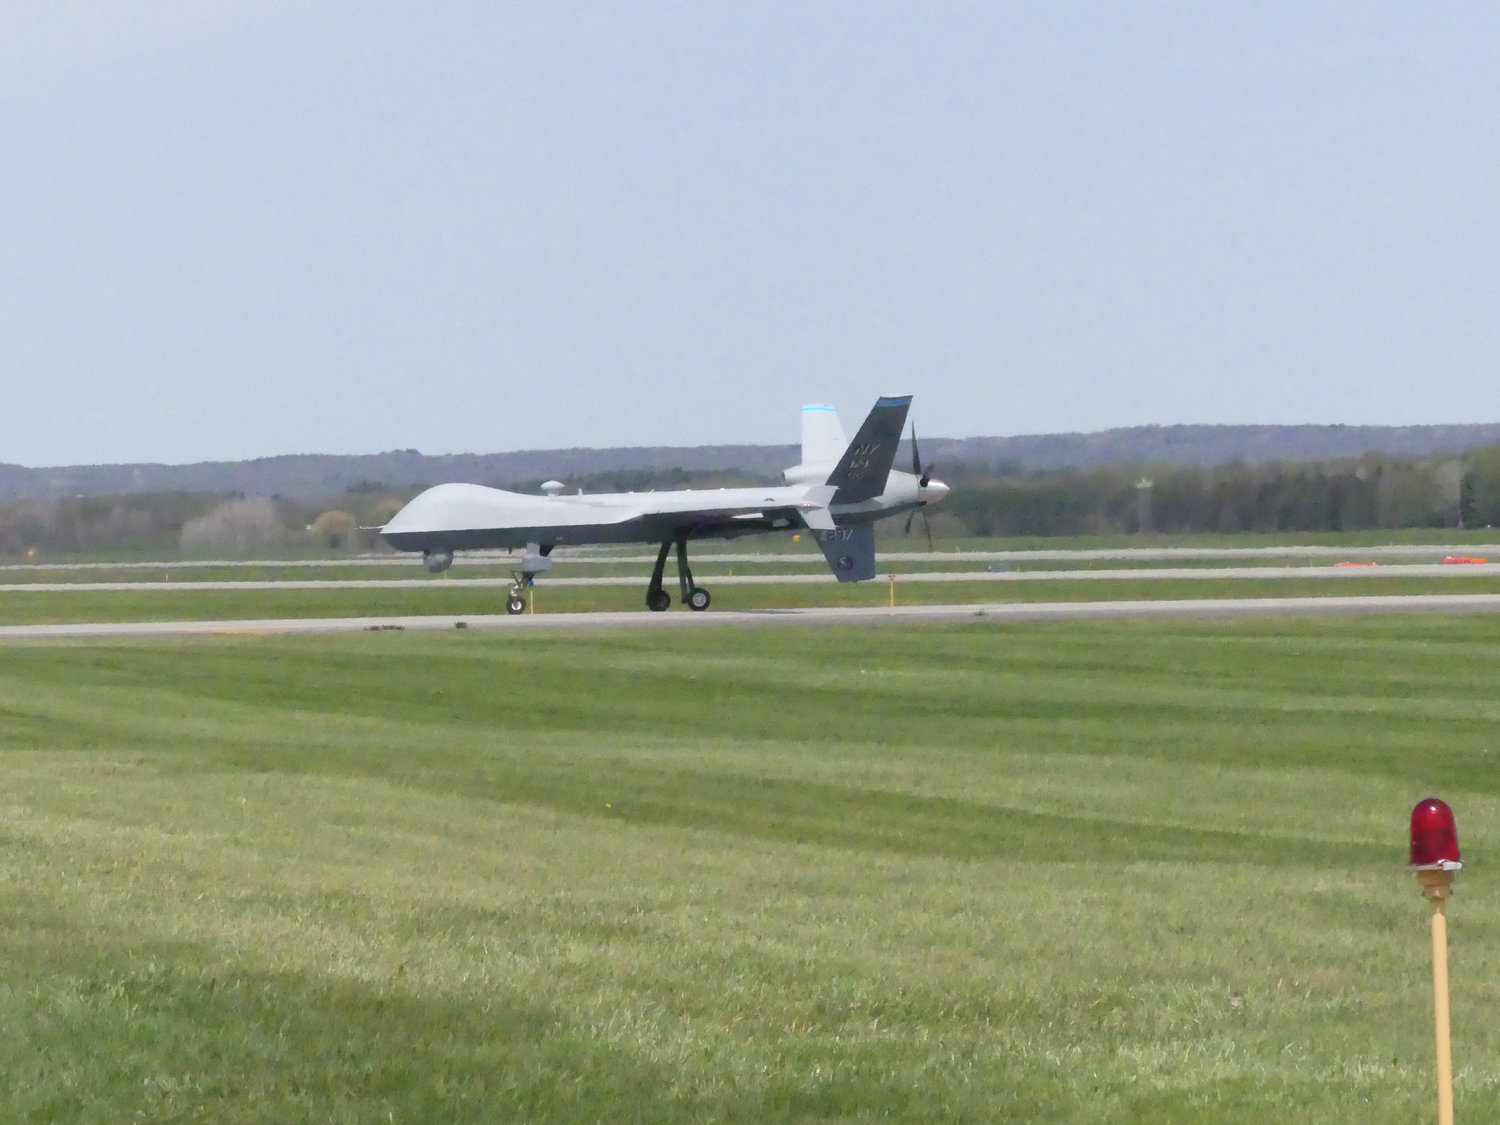 Pictured is an MQ-9 Reaper remotely piloted aircraft, took off from Hancock Field Air National Guard Base in Syracuse and landed at Griffiss International Airport in Rome Thursday, May 5.